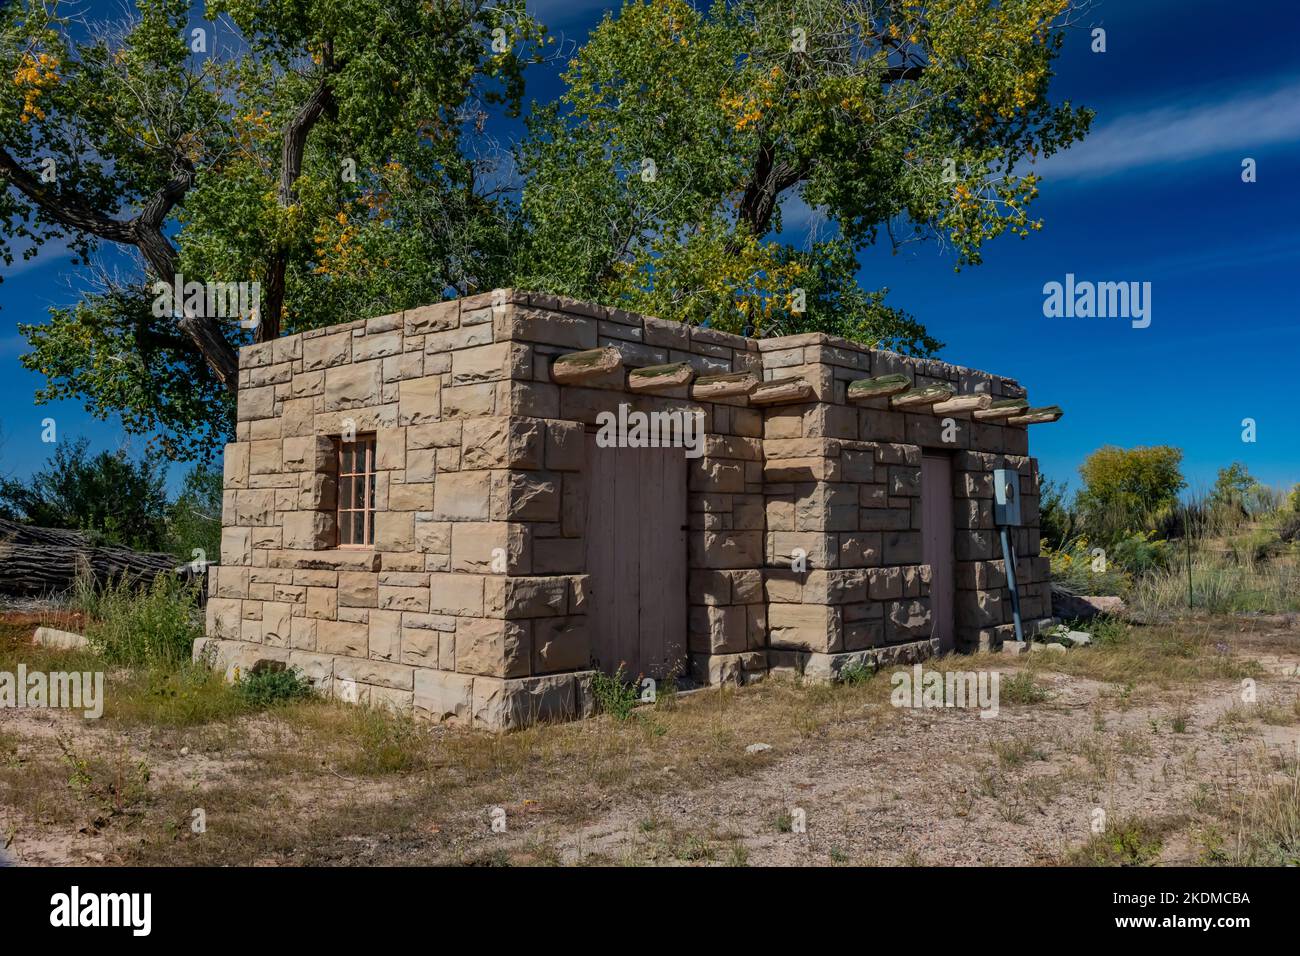 Rustic NPS building at the archeological site of Puerco Pueblo in Petrified Forest National Park, Arizona, USA Stock Photo